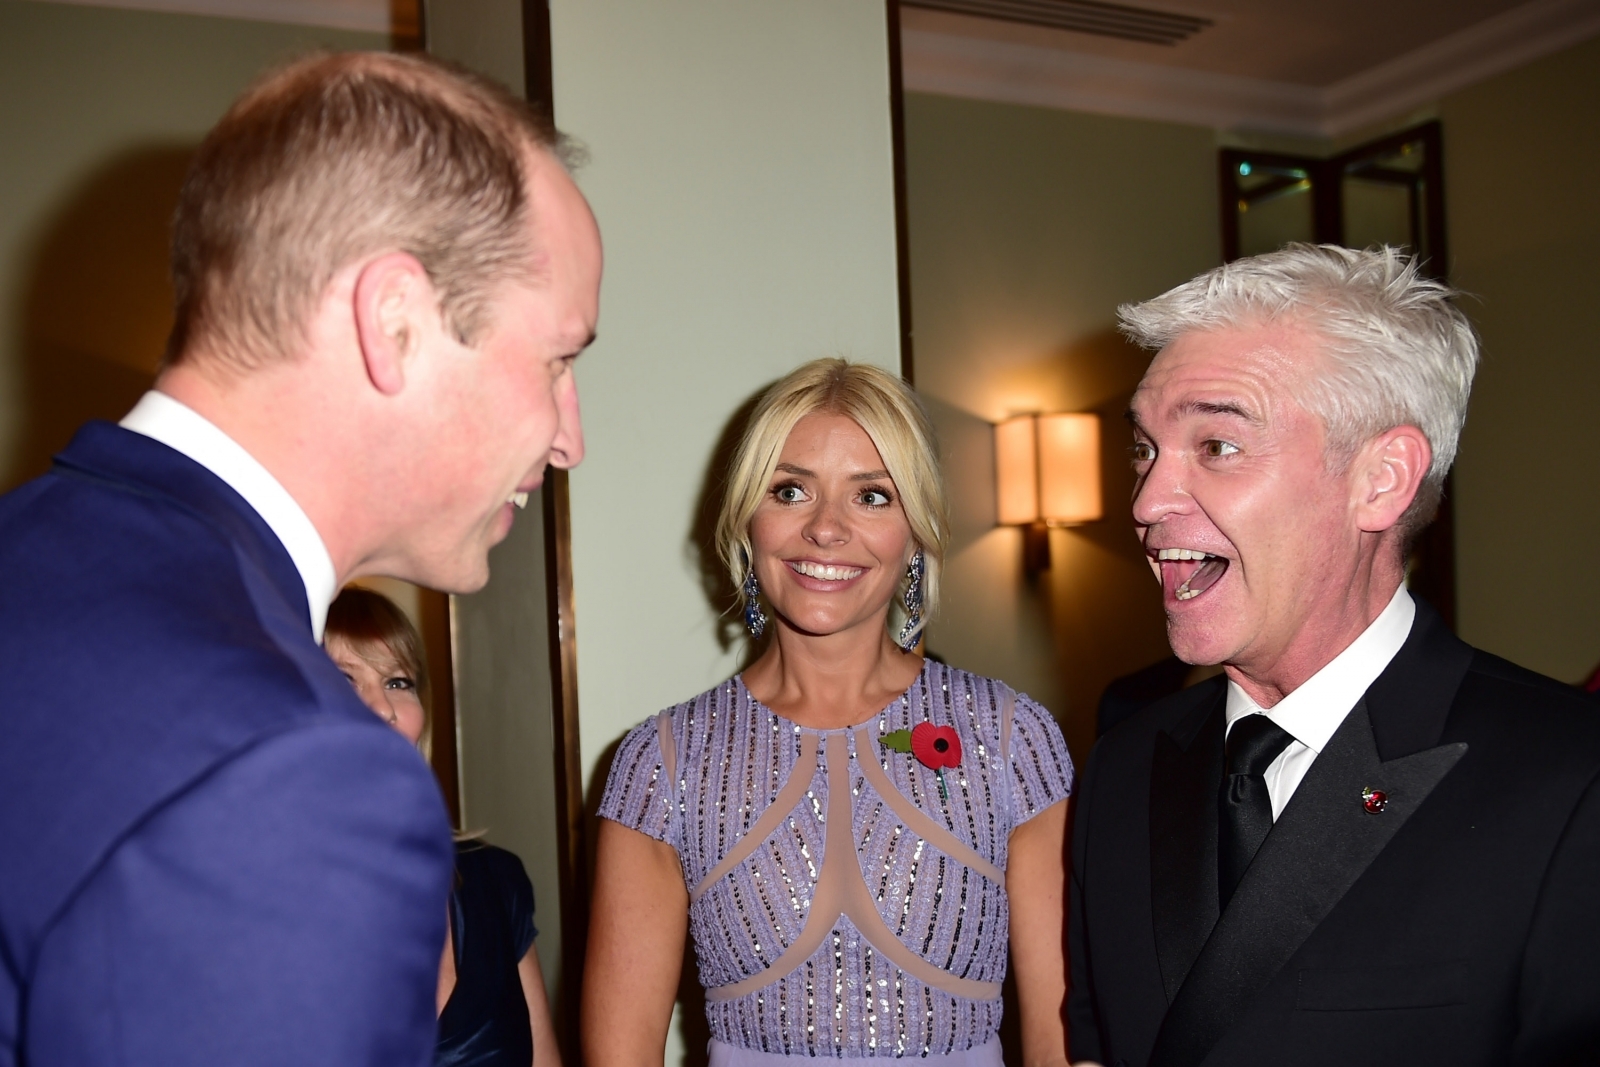 Starstruck Holly Willoughby beams in Prince William's company in funny Instagram picture